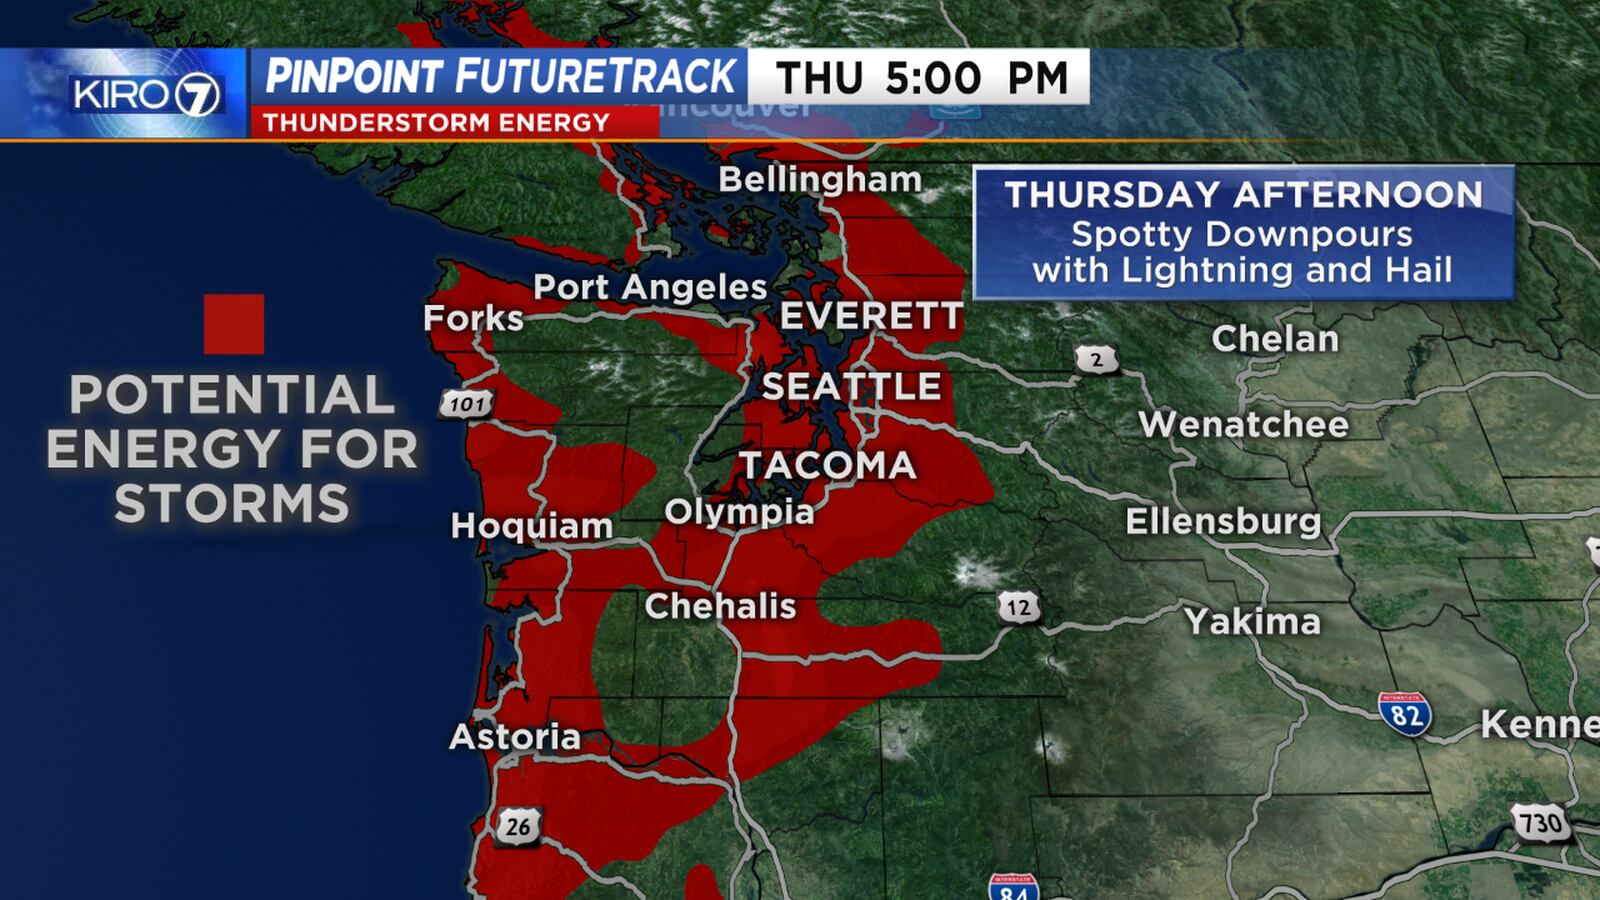 Thursday thunderstorms could impact Seahawks game – KIRO 7 News Seattle